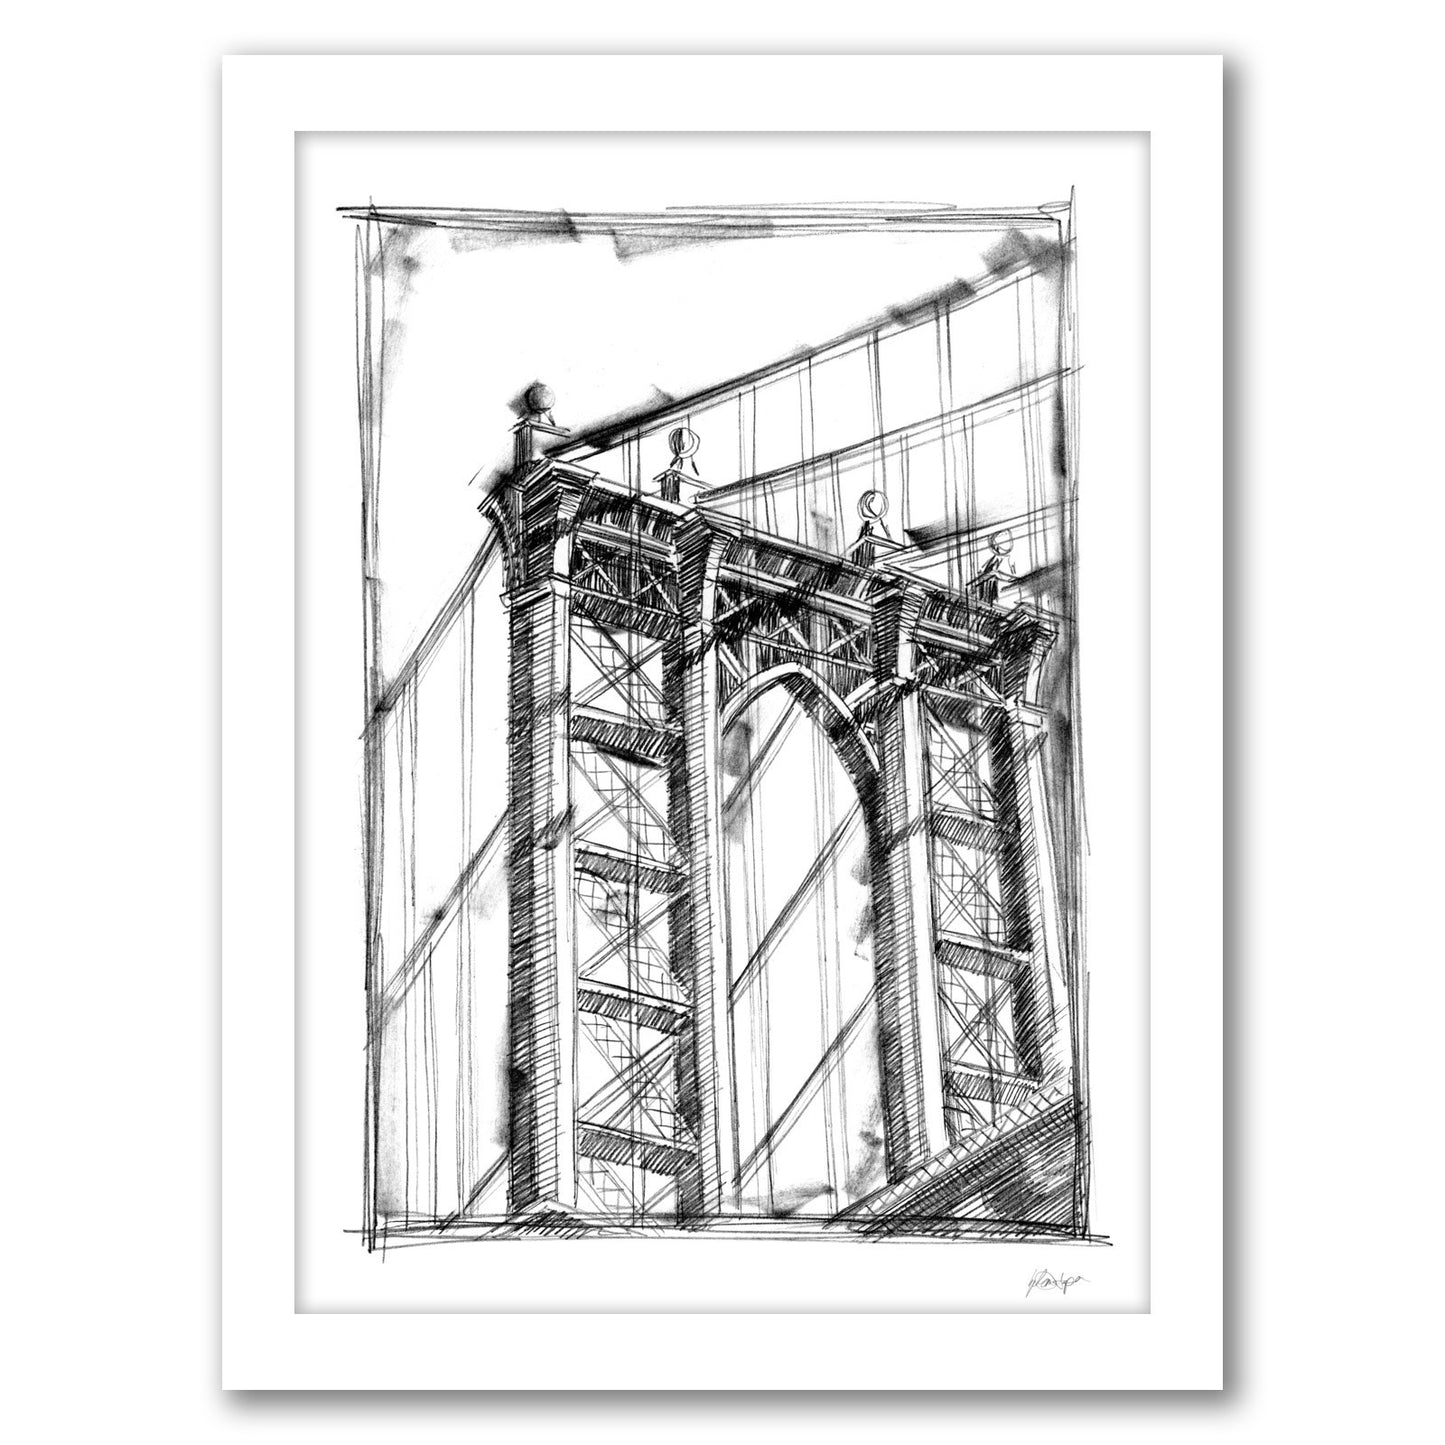 Graphic Architectural Study IV by Ethan Harper by World Art Group - Framed Print